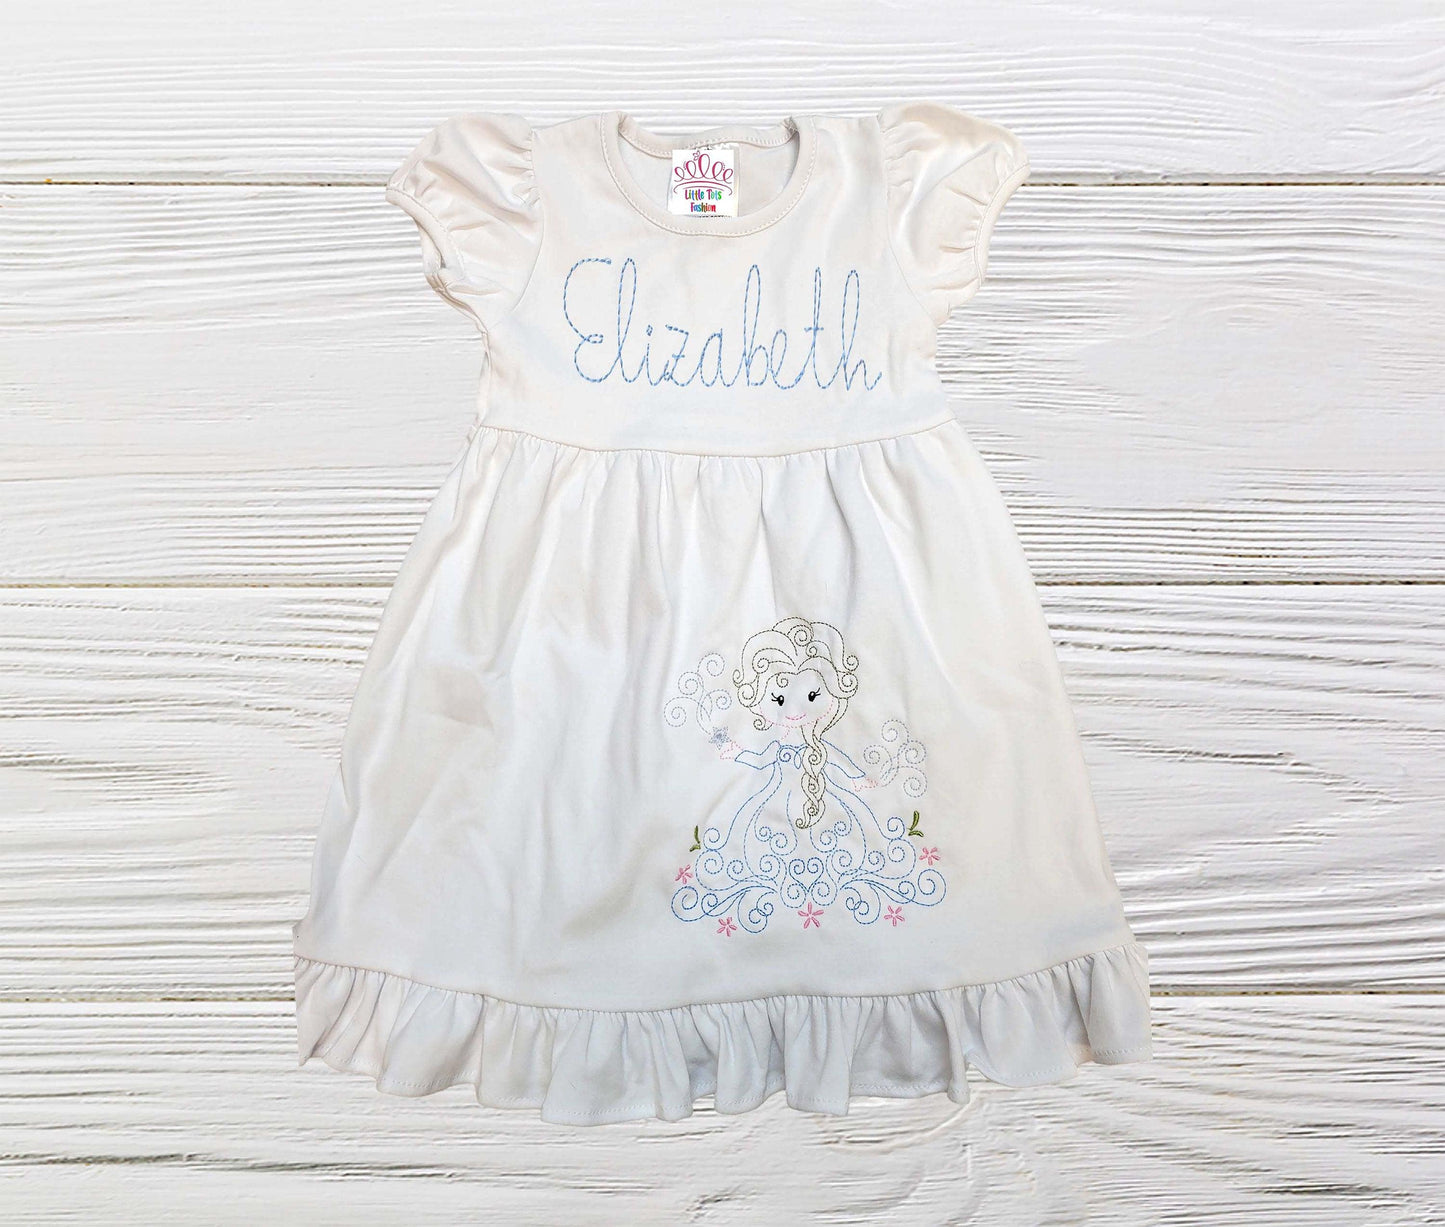 Close-up of the personalized Elsa Frozen Dress with a 'Thank You' message